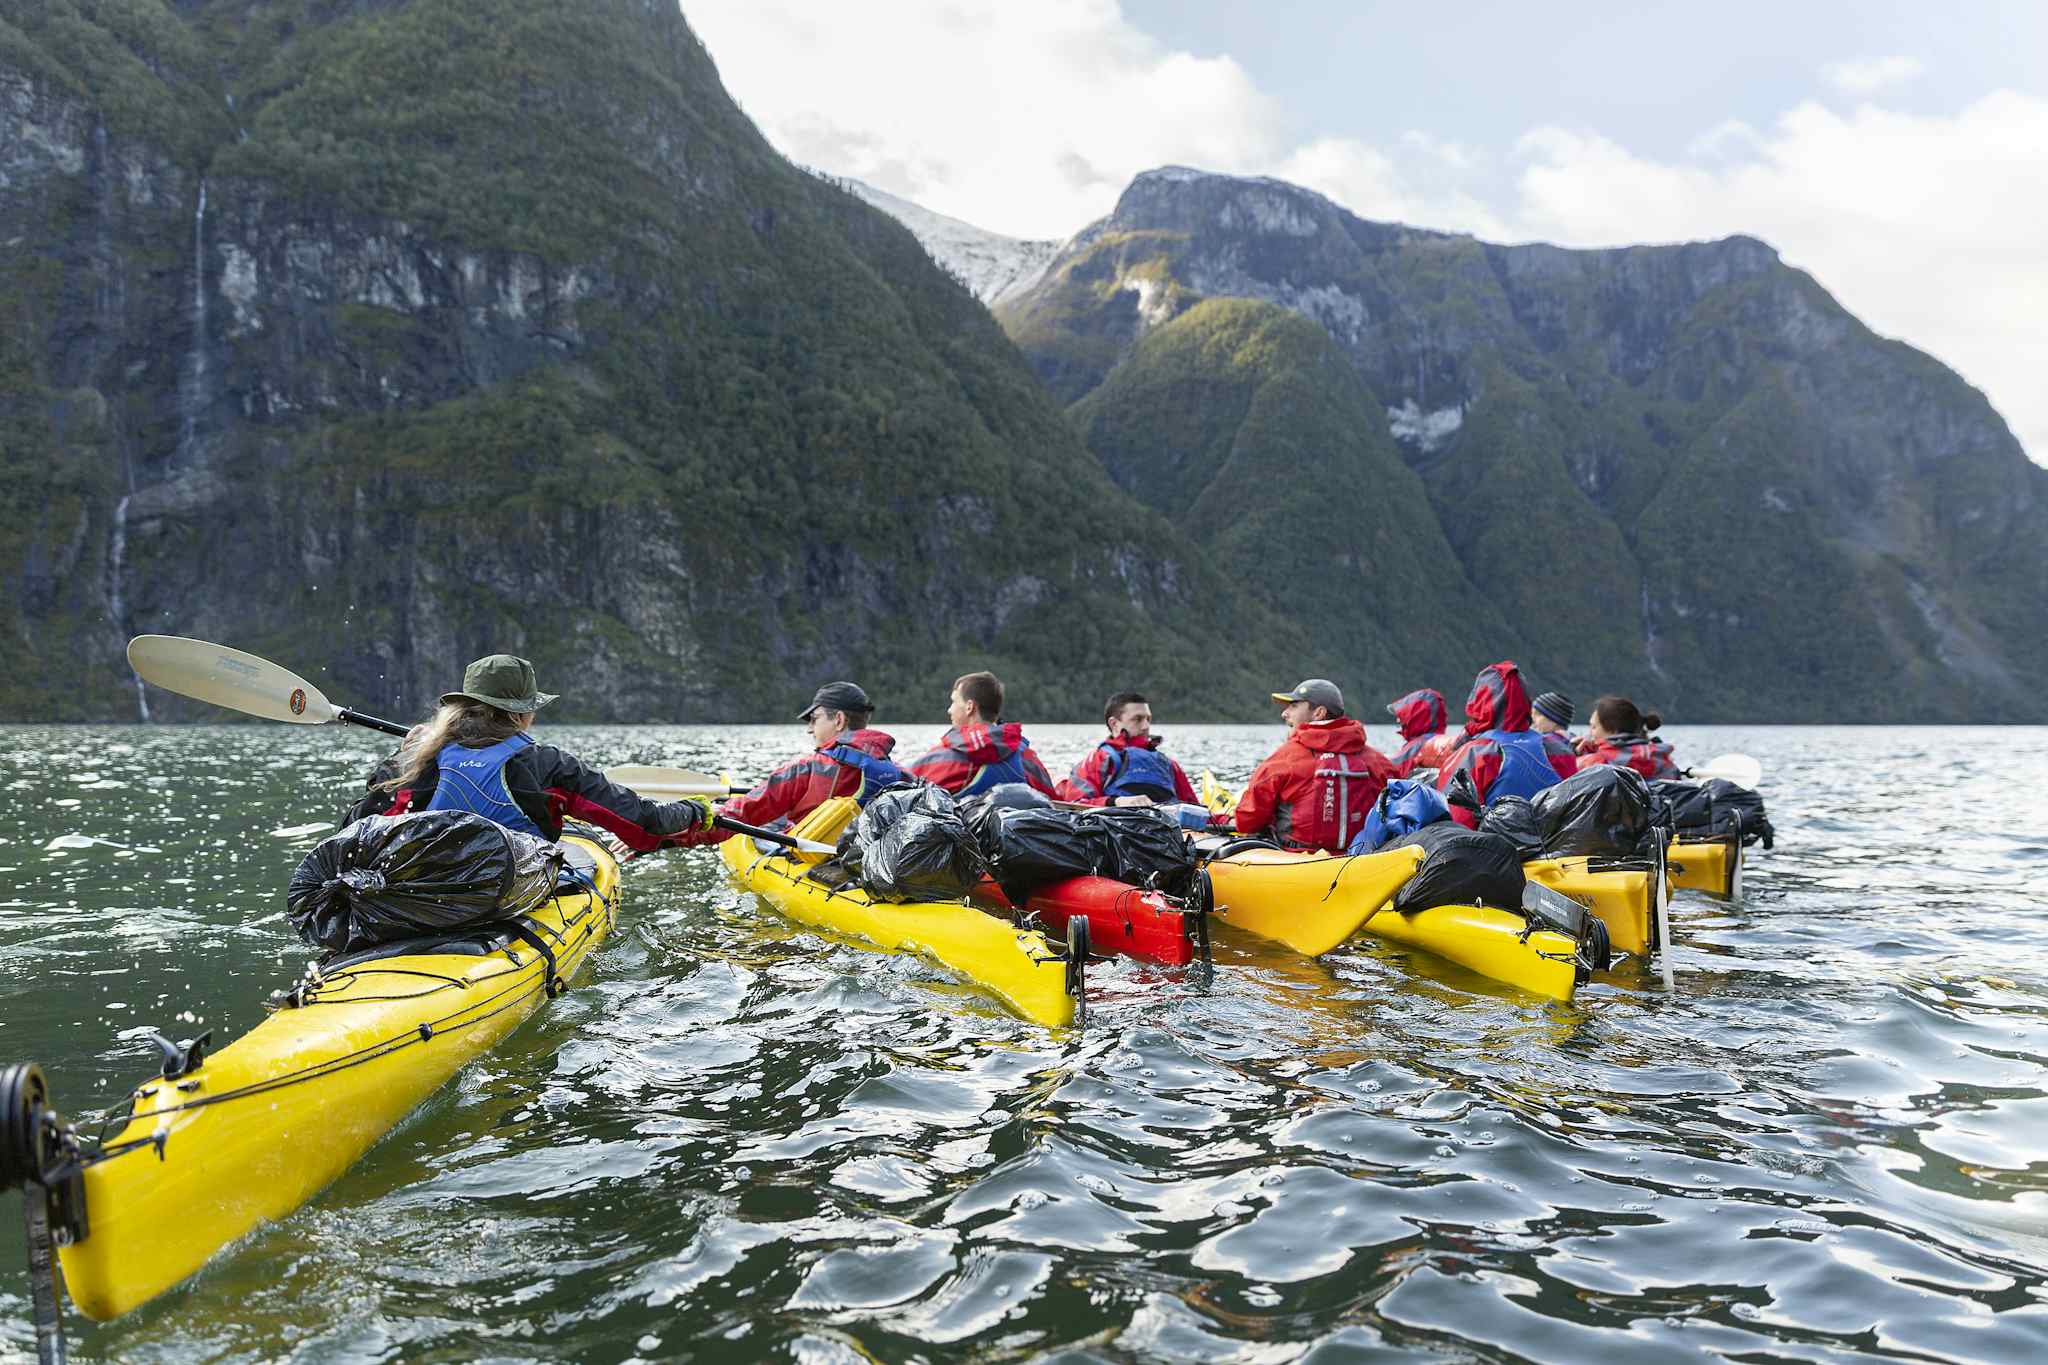 A group of kayakers stop for a rest on the waters of the Naeroyfjord in the Norwegian Fjords.